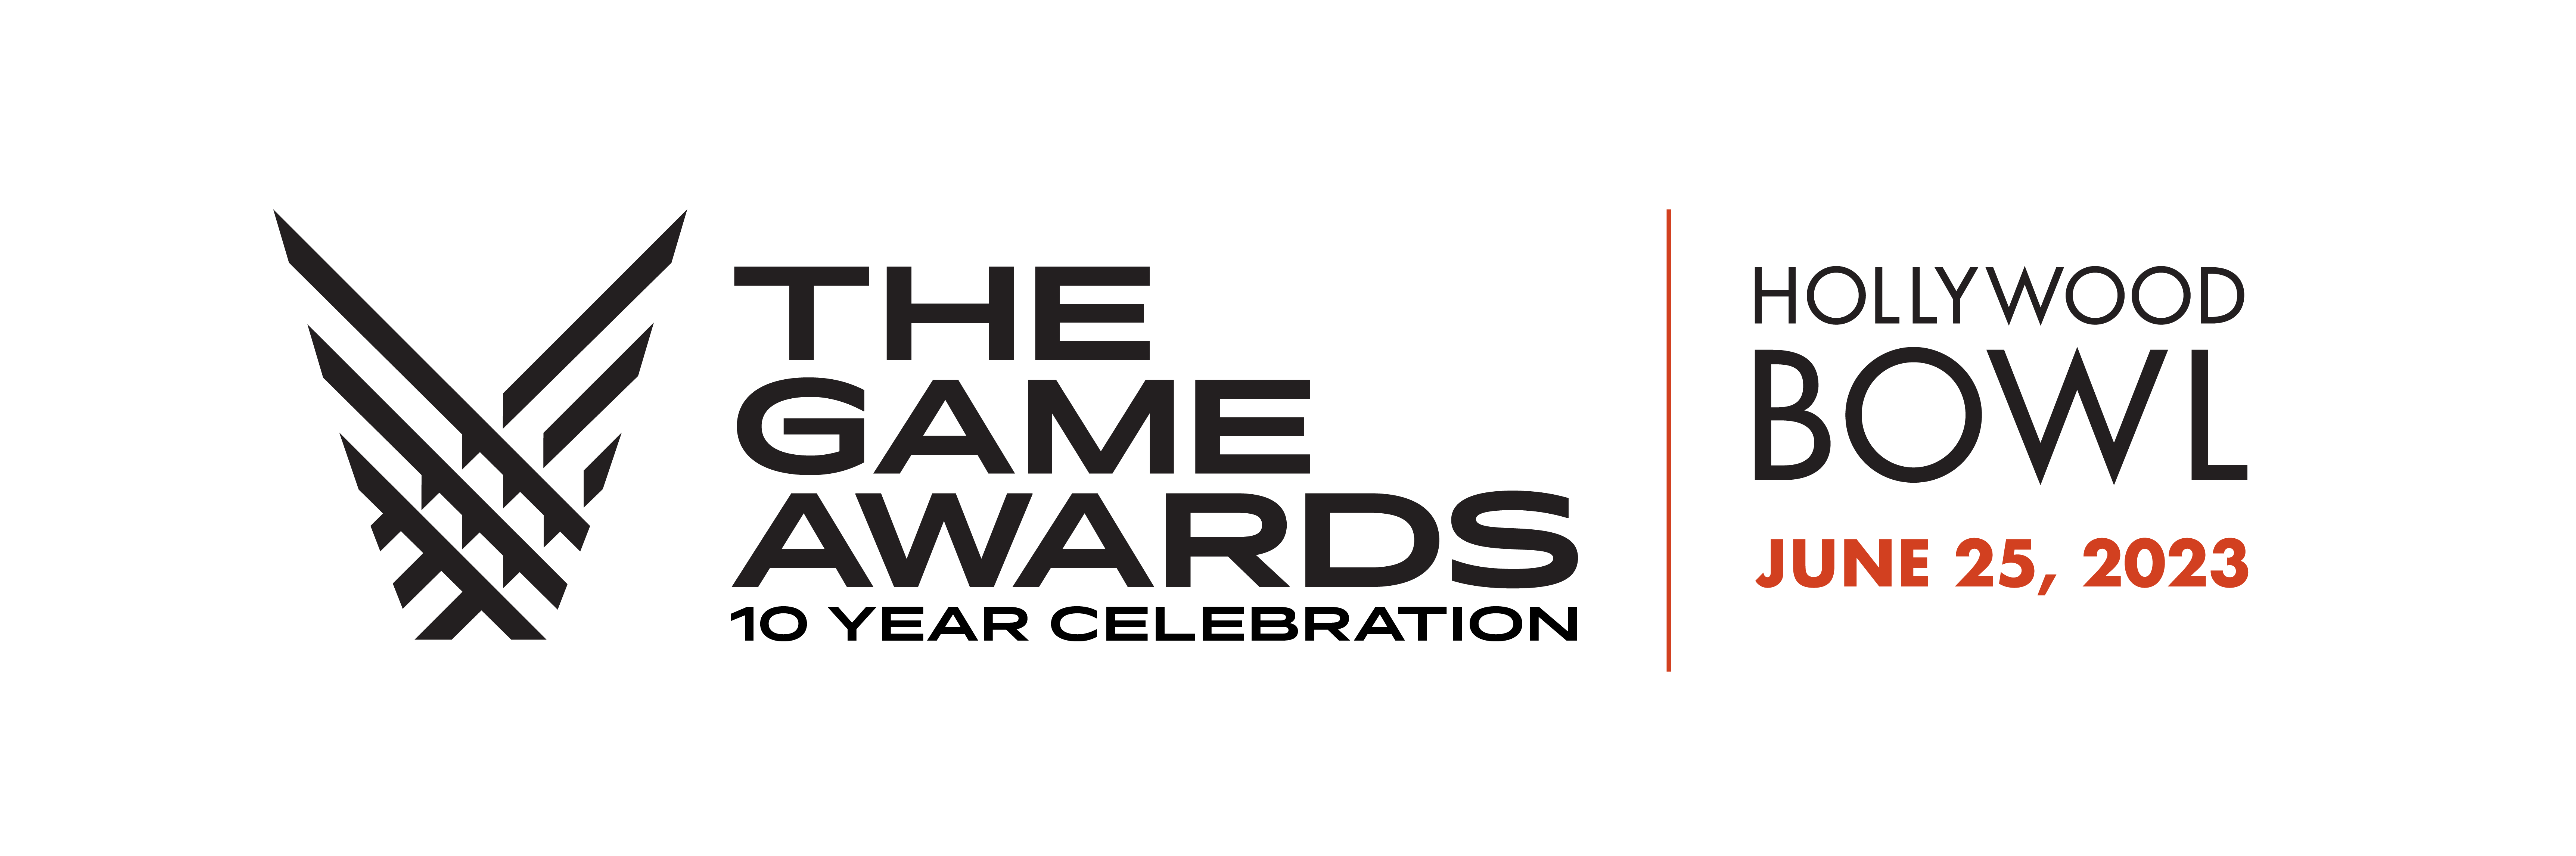 Geoff Keighley details The Game Awards 2021 and Beyond - Epic